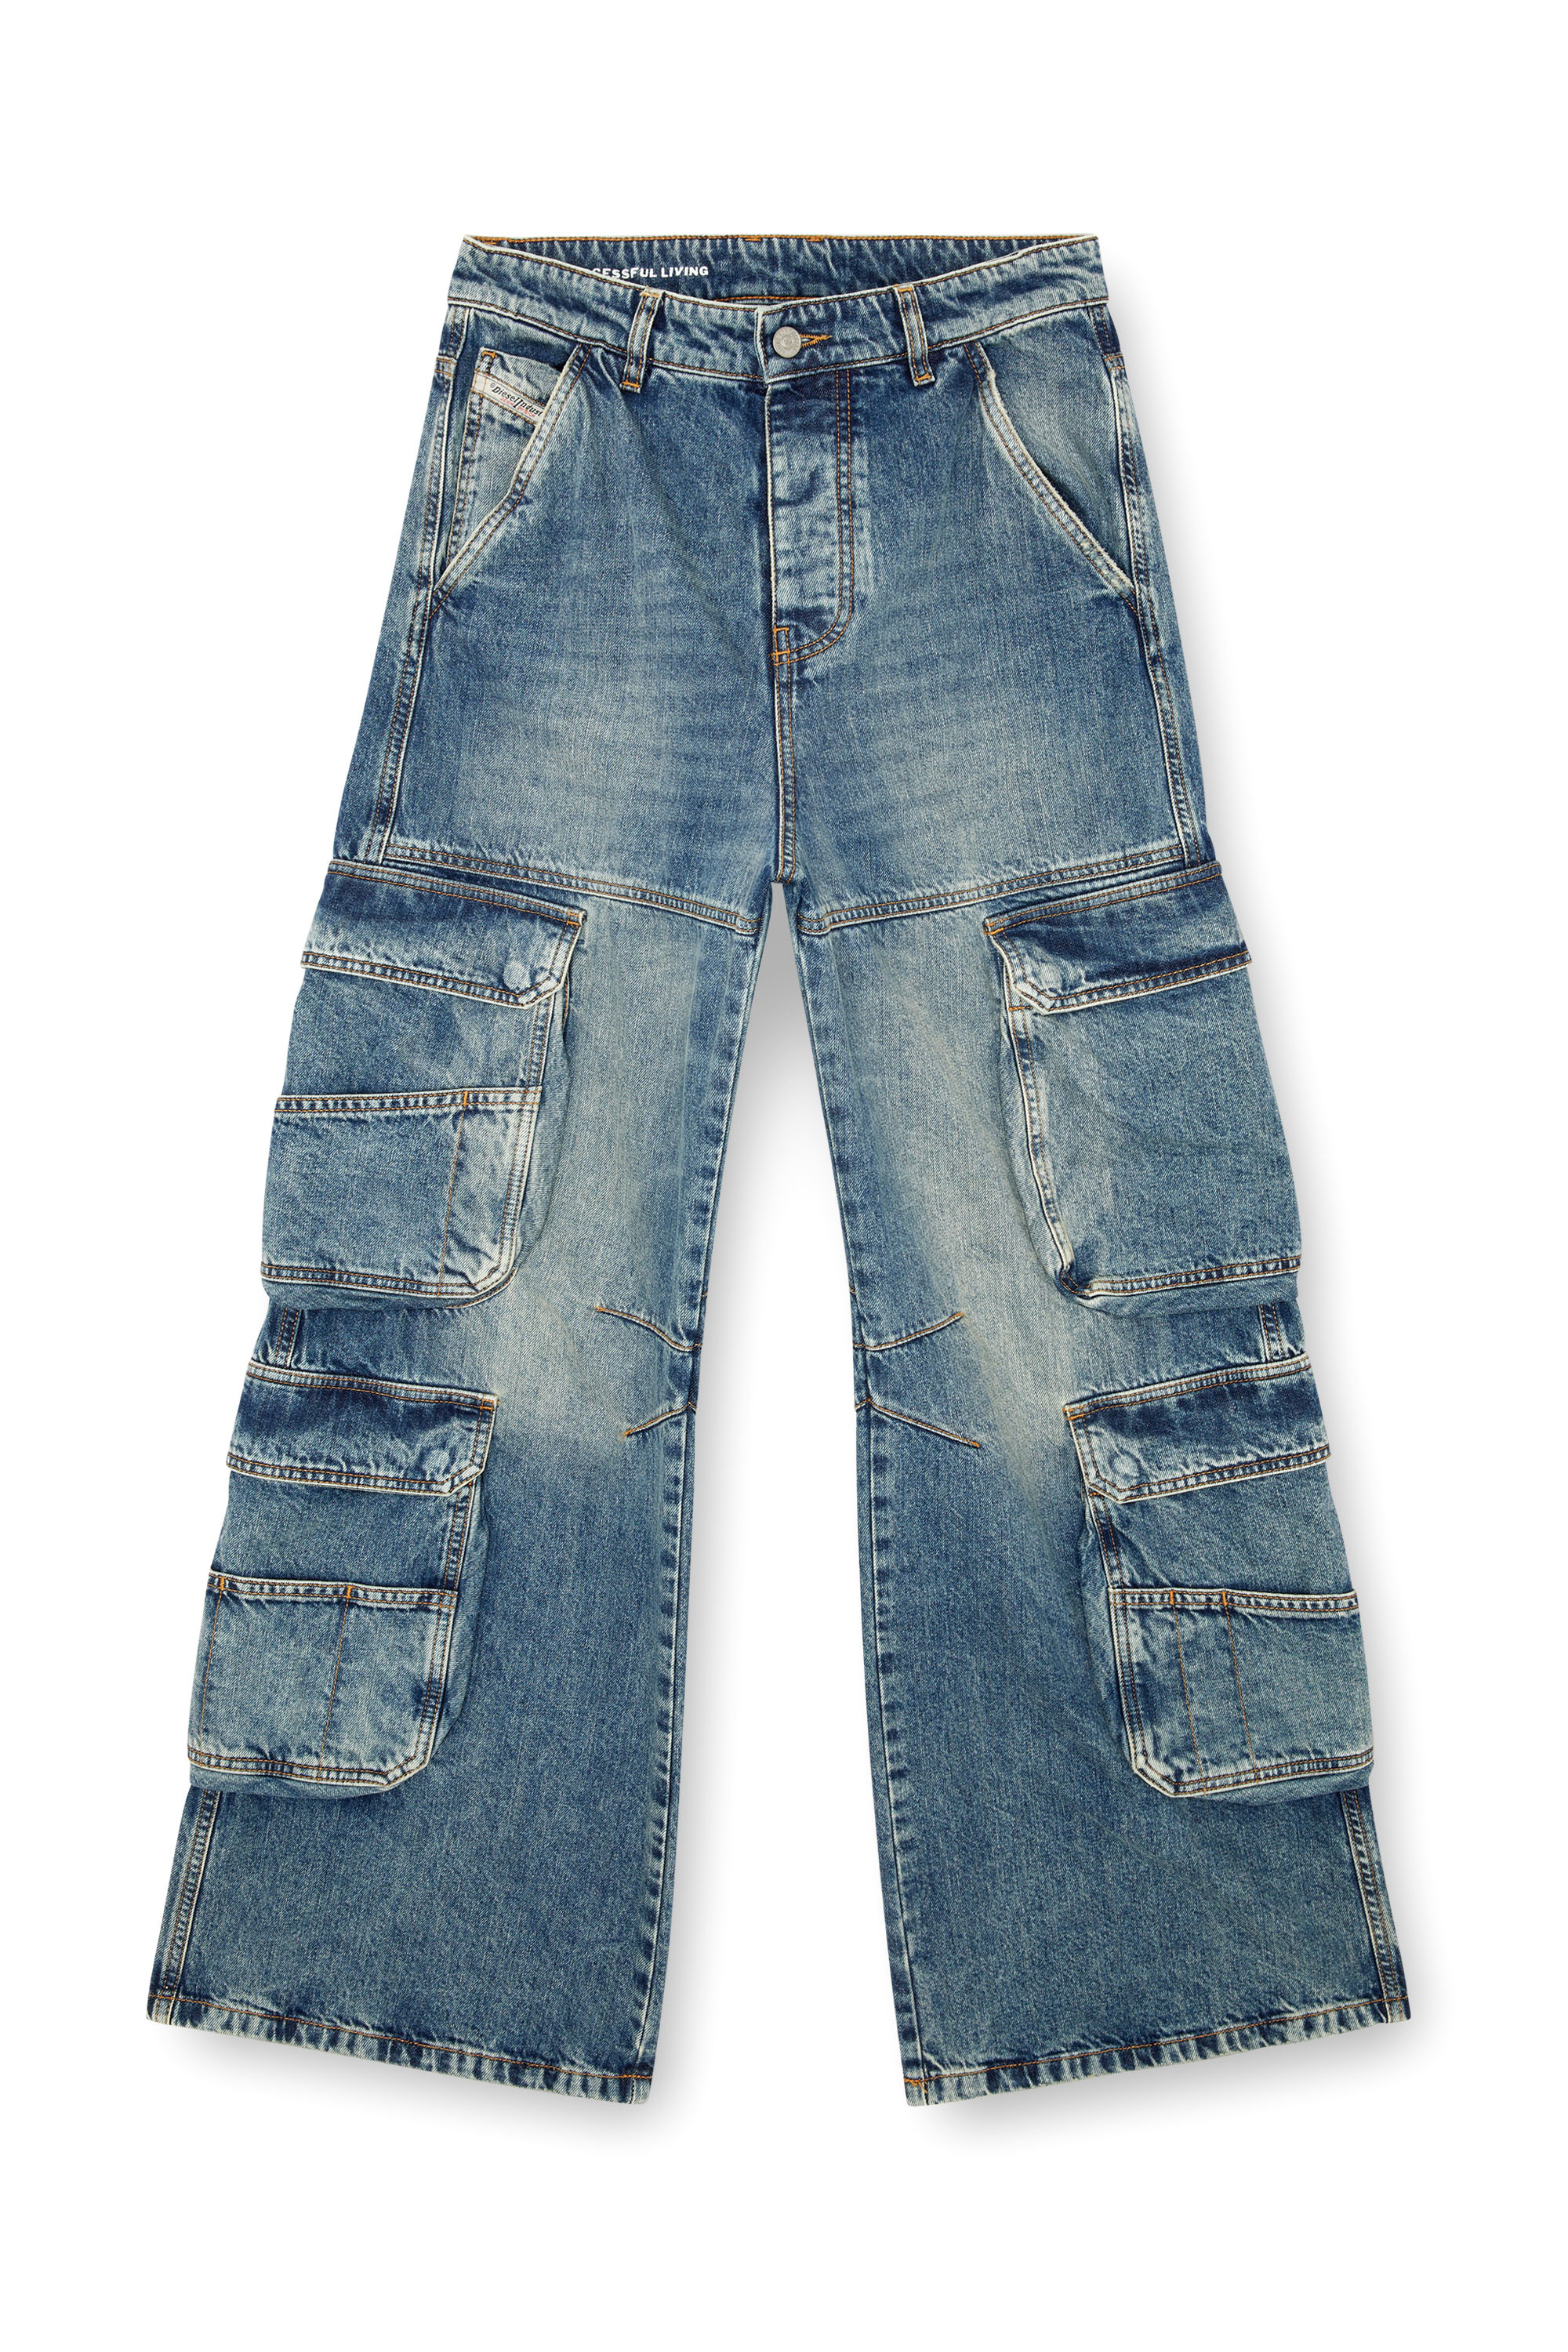 Diesel - Straight Jeans 1996 D-Sire 0NLAX, Mujer Straight Jeans - 1996 D-Sire in Azul marino - Image 1